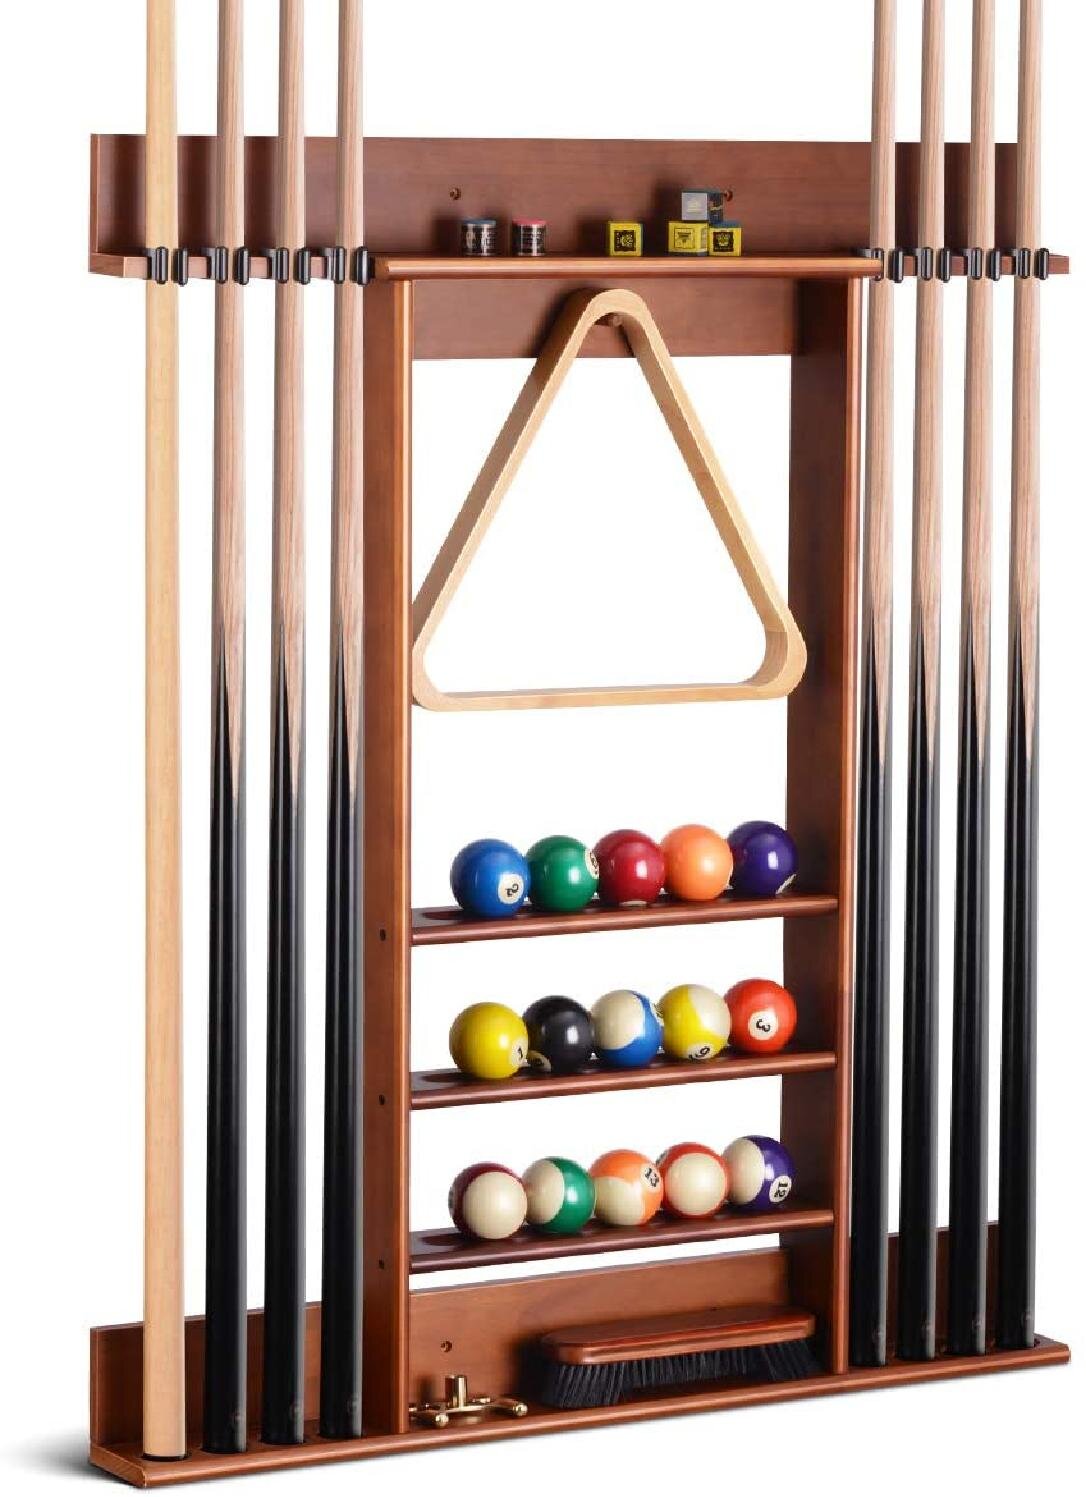 3-Piece Set MyGift Wall Mounted Dark Brown Wood Pool Cue Stick Holder Rack for 6 Cues with Billiard Ball Storage Shelf 